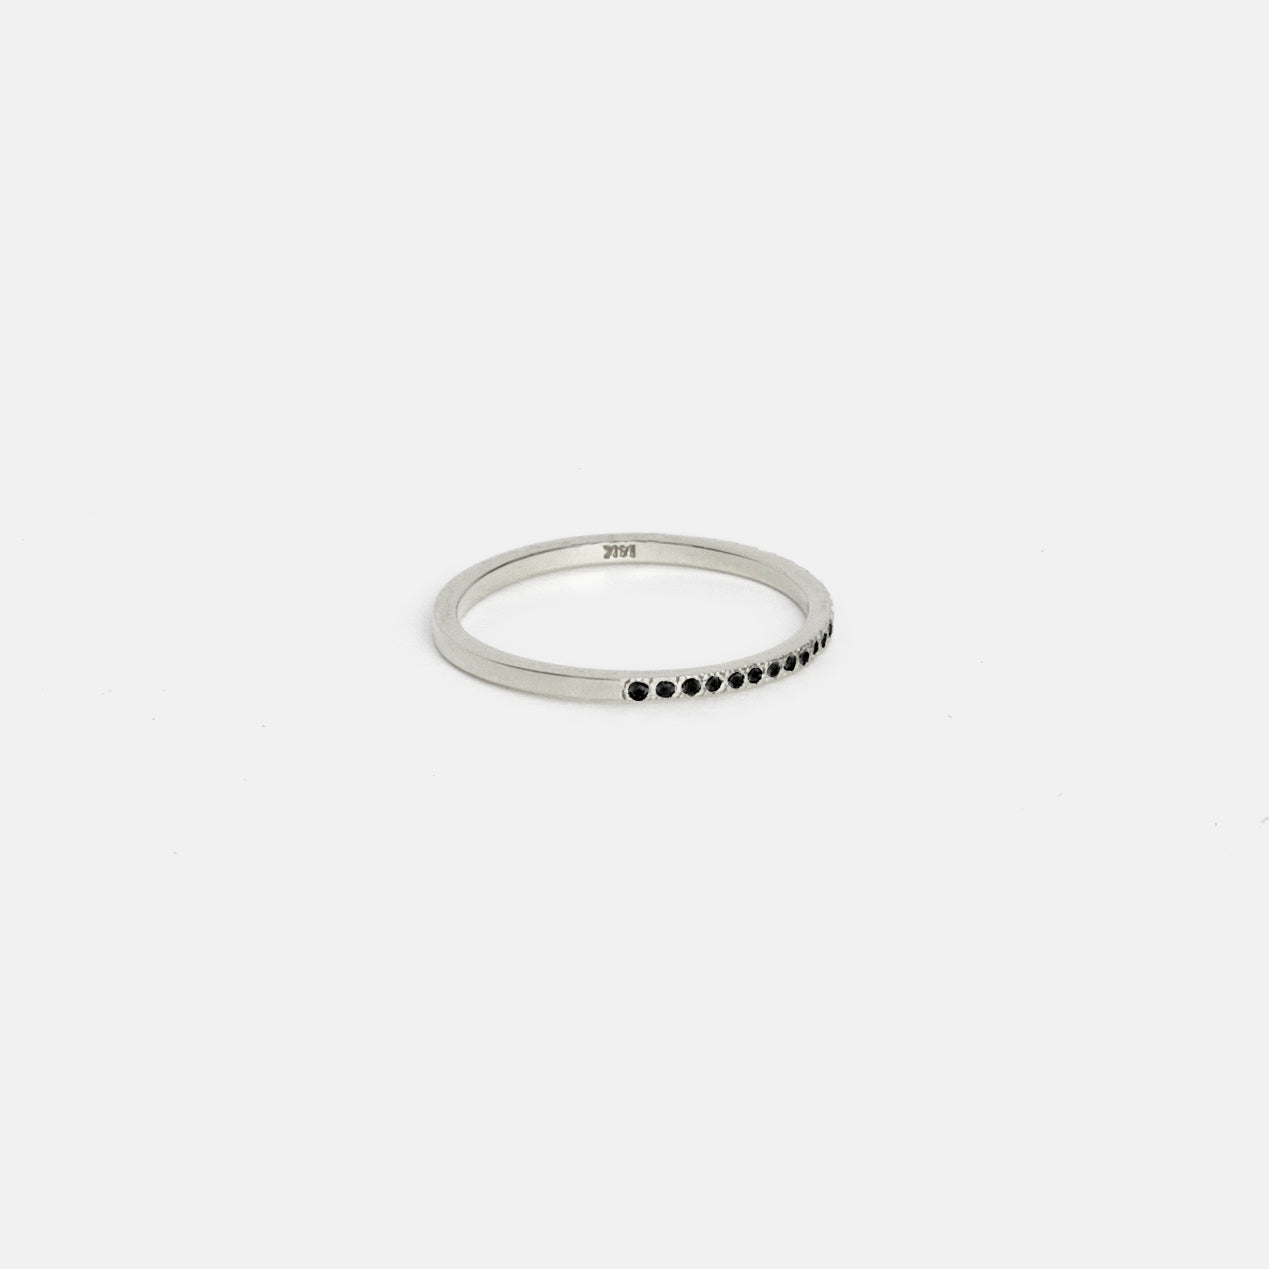 Eile Designer Ring in 14k White Gold set with Black Diamonds By SHW Fine Jewelry New York CIty